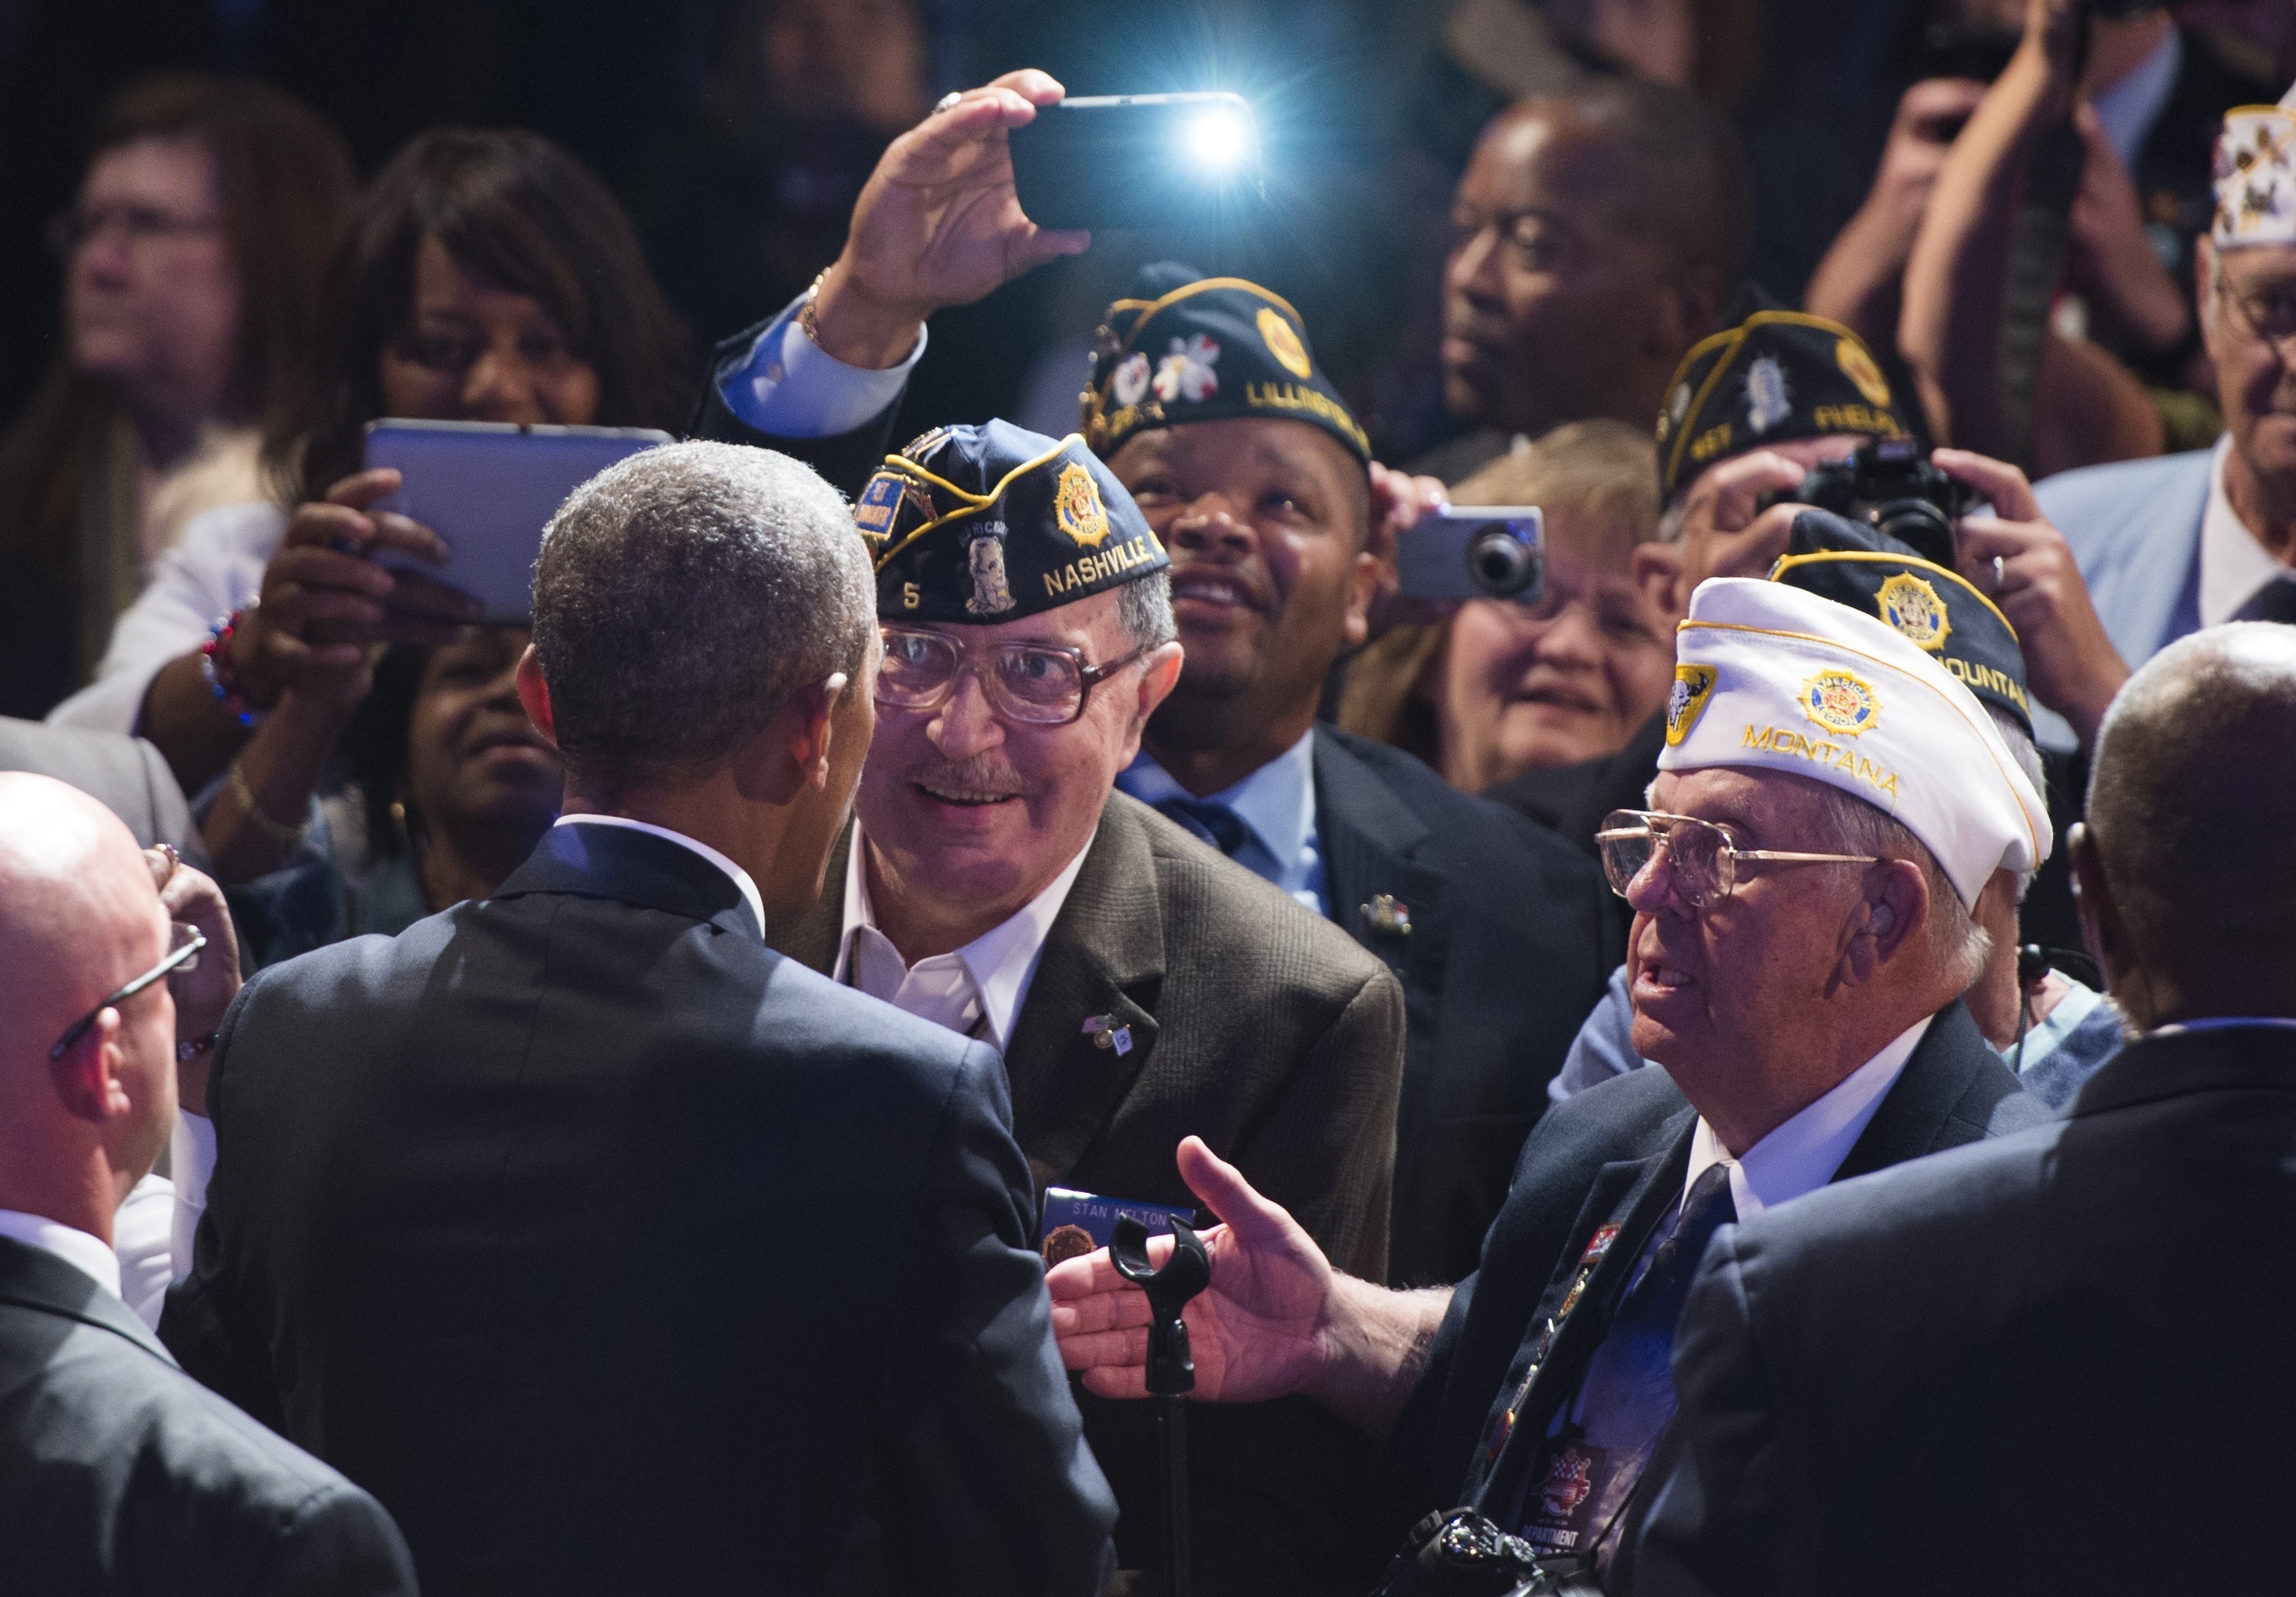 President Barack Obama greets members of the American Legion after speaking at the American Legion's 96th National Convention in Charlotte, North Carolina, August 26, 2014. (SAUL LOEB&mdash;AFP/Getty Images)